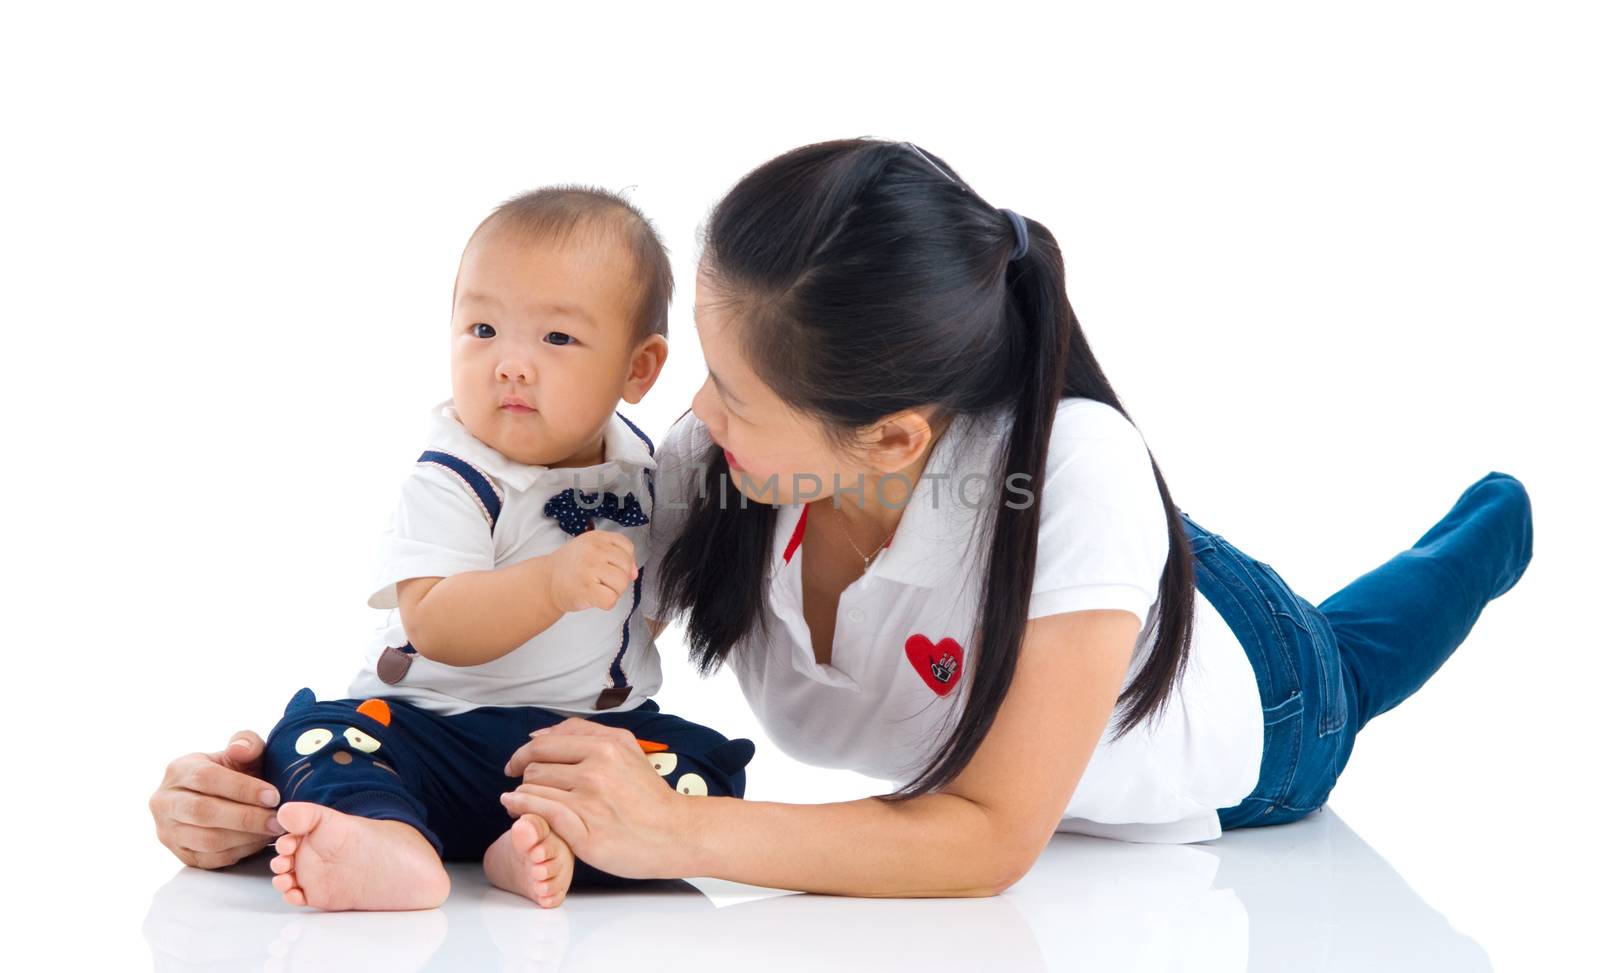 Asian mother and baby indoor portrait